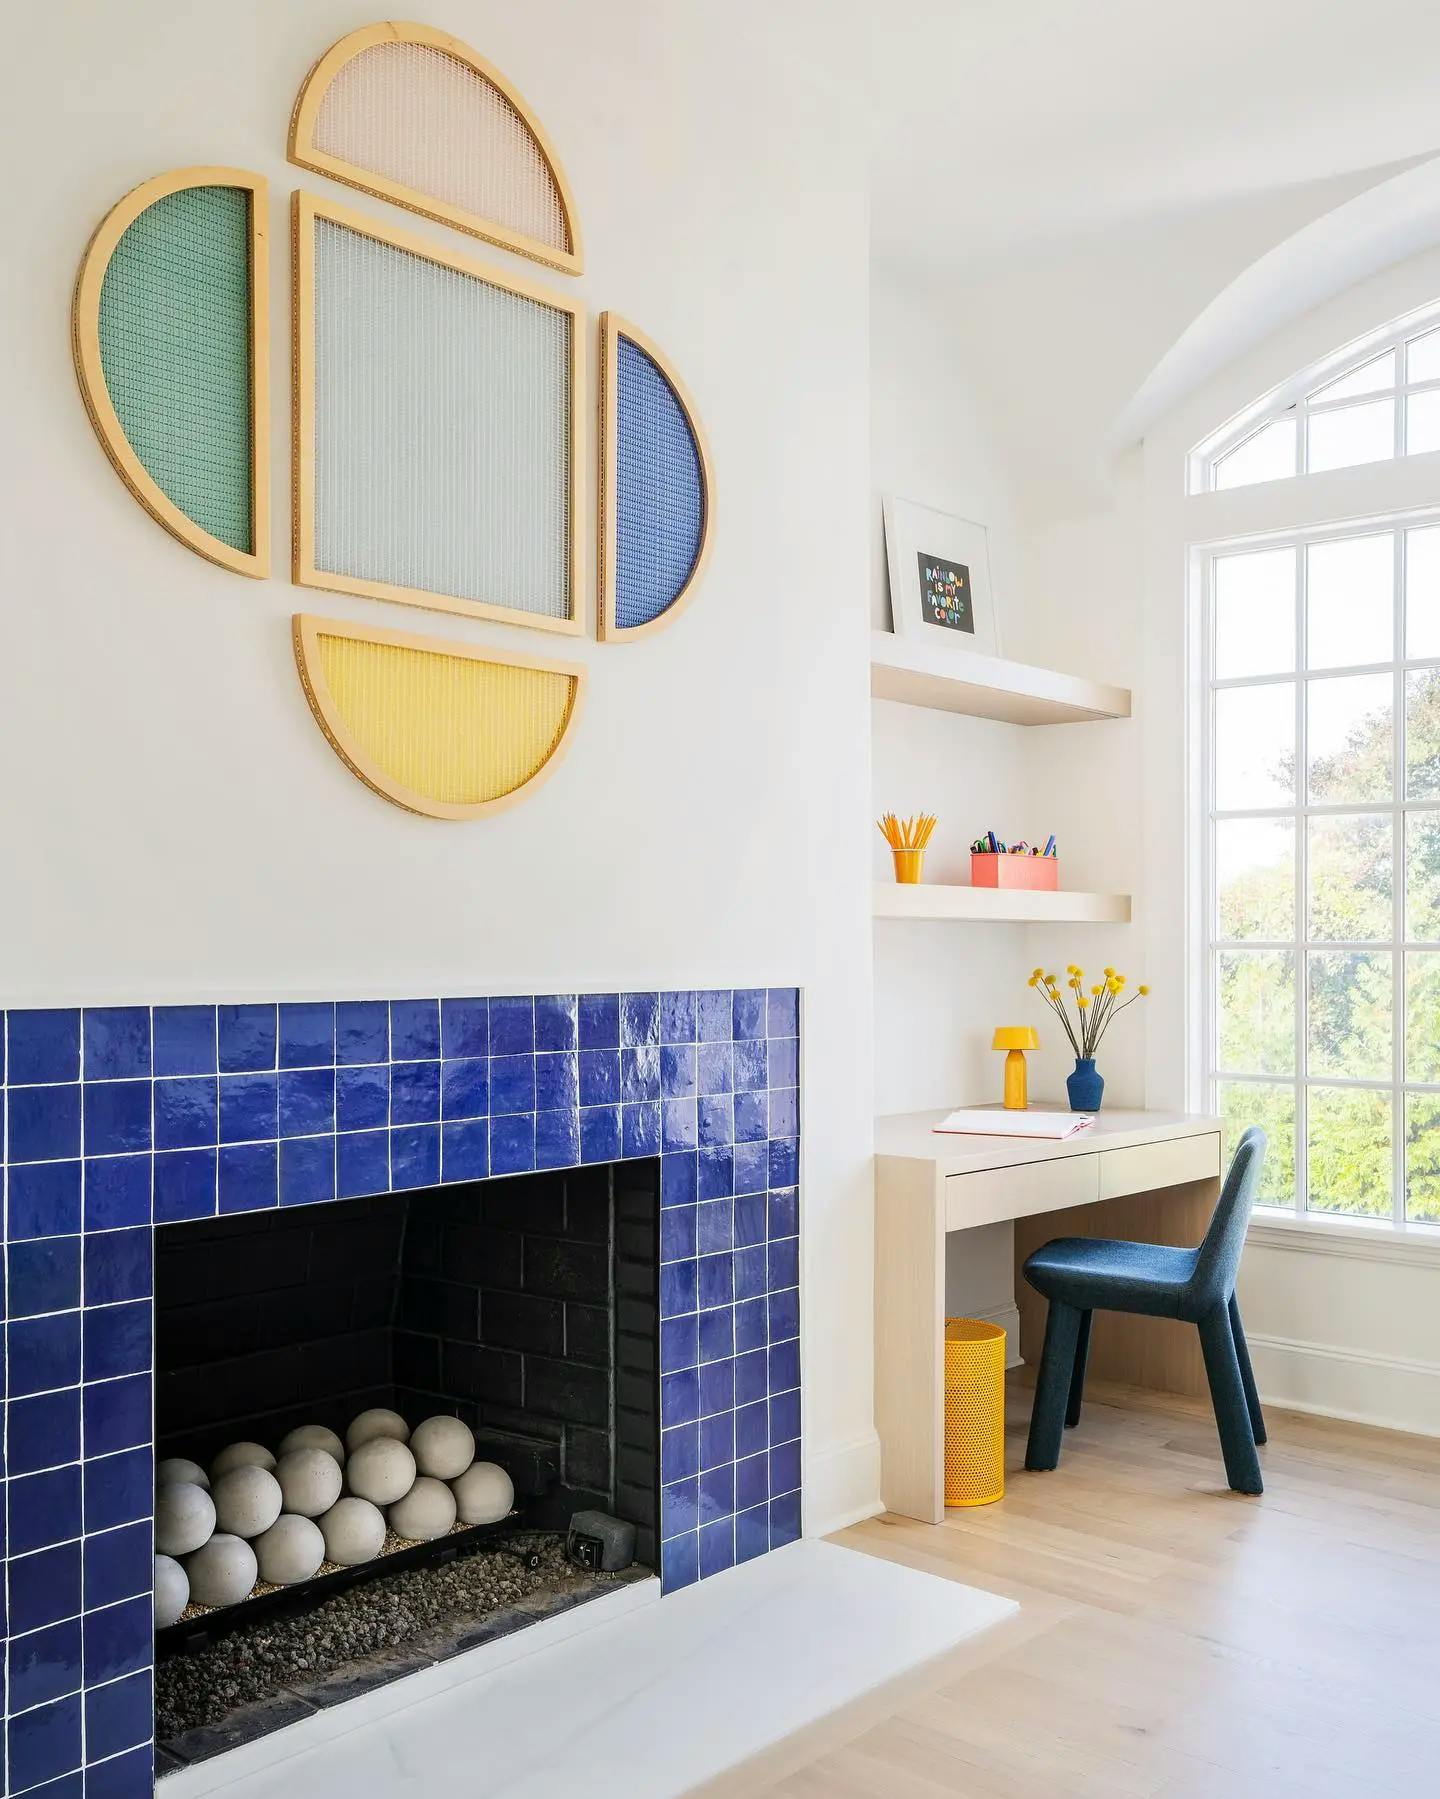 Stitched shaped screens in the shape of a clover by artist Hayley Sheldon above a blue-tiled fireplace in a children's playroom.